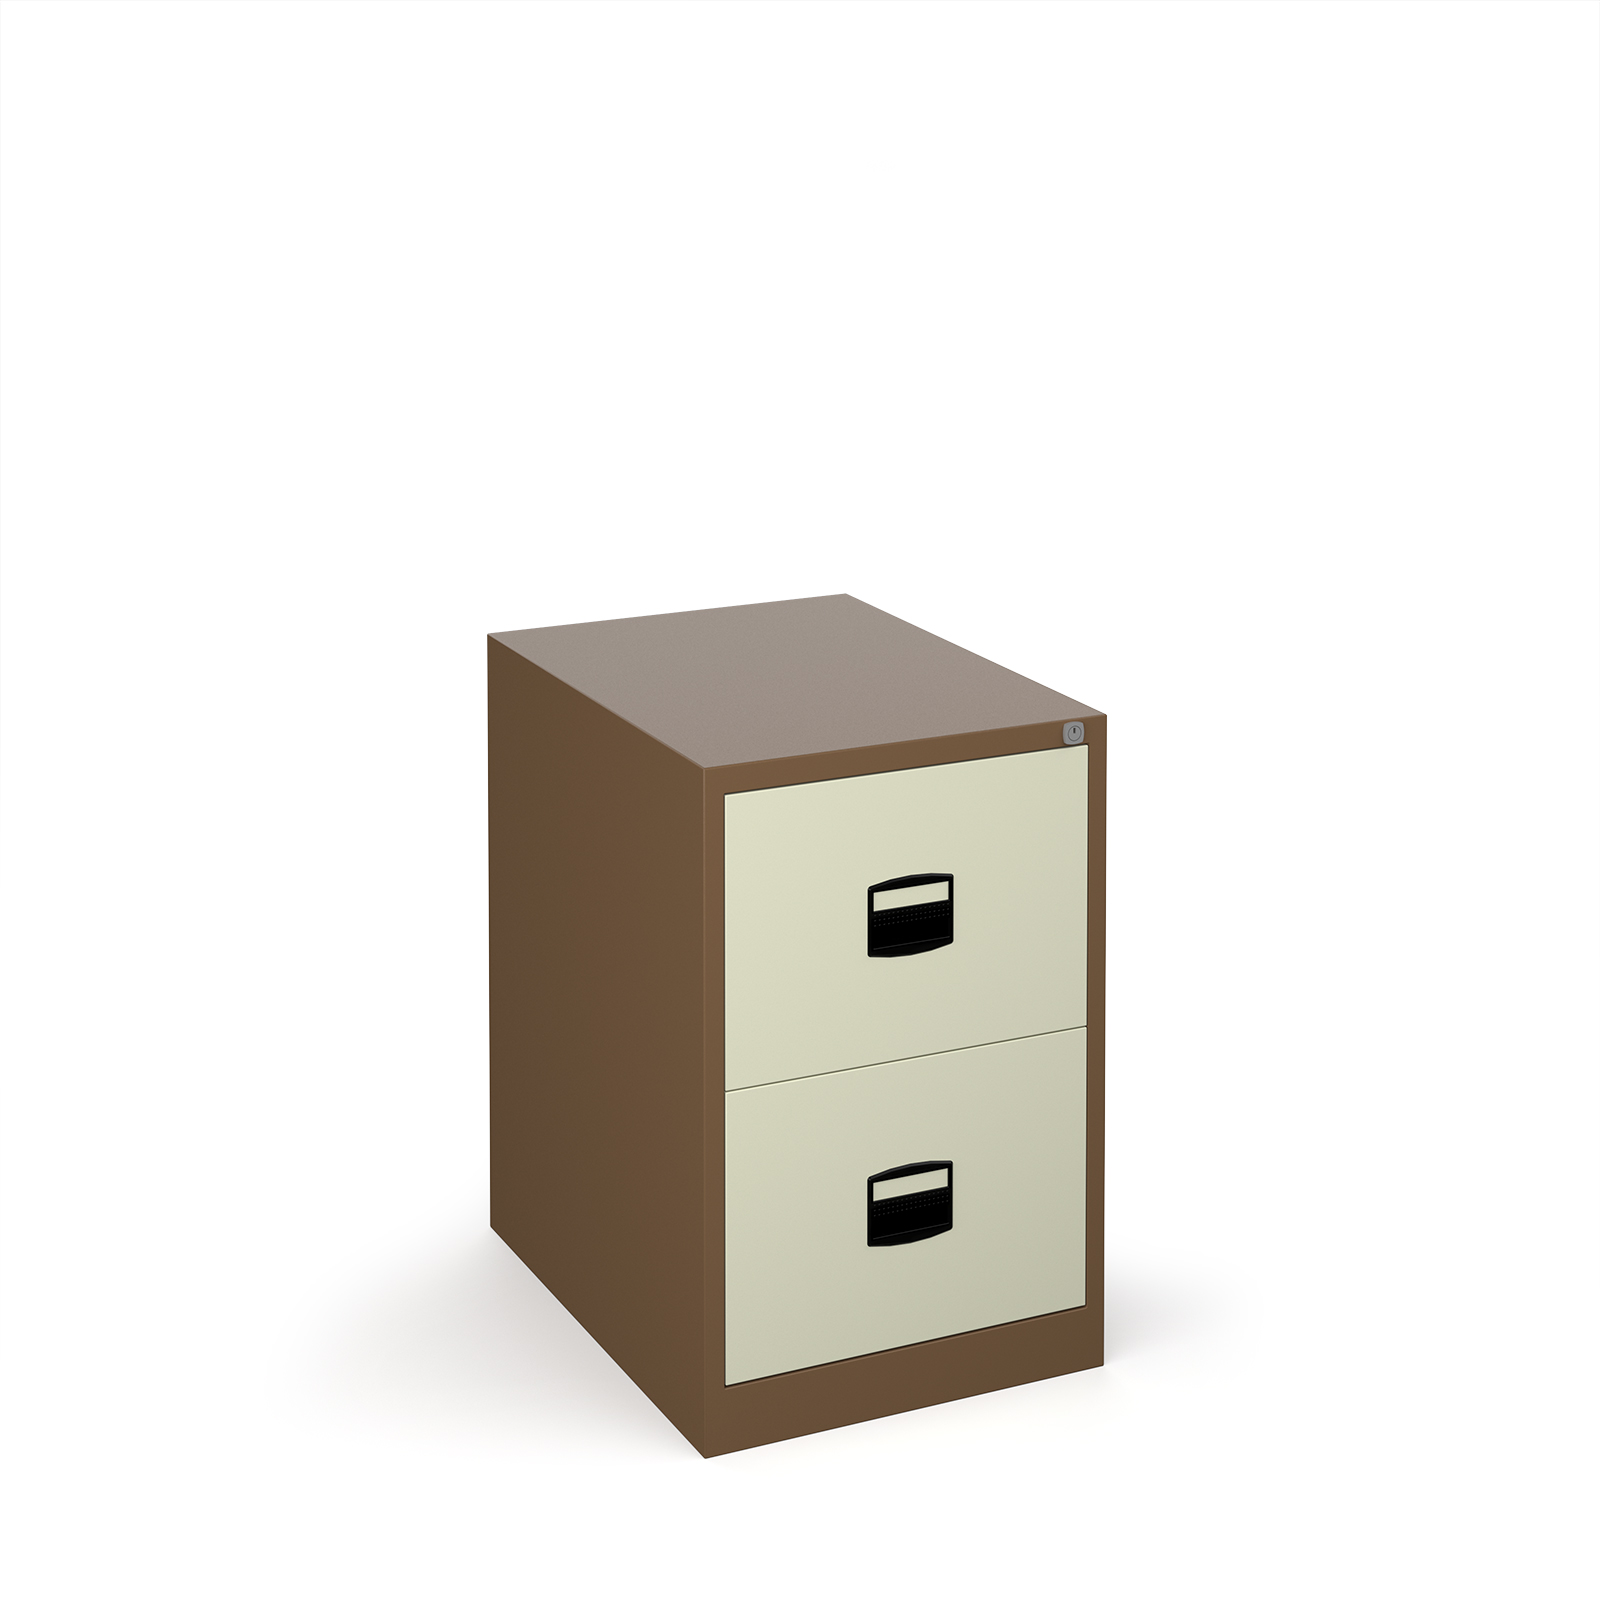 Steel Steel 2 drawer contract filing cabinet 711mm high - coffee/cream 